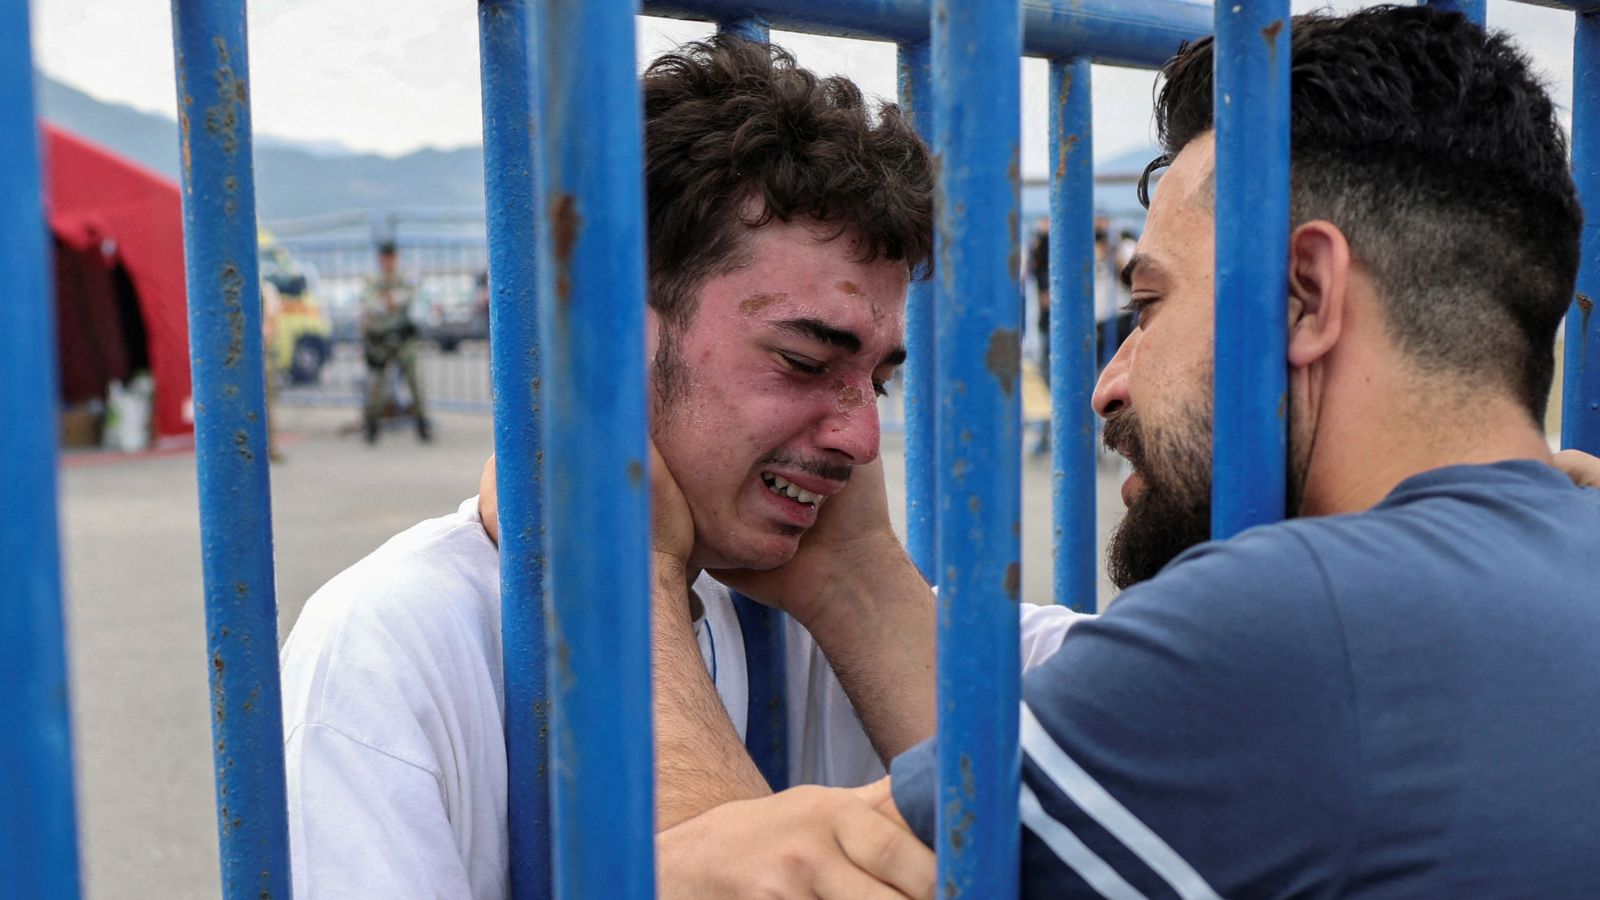 Greece migrant boat disaster survivor has emotional reunion with ...